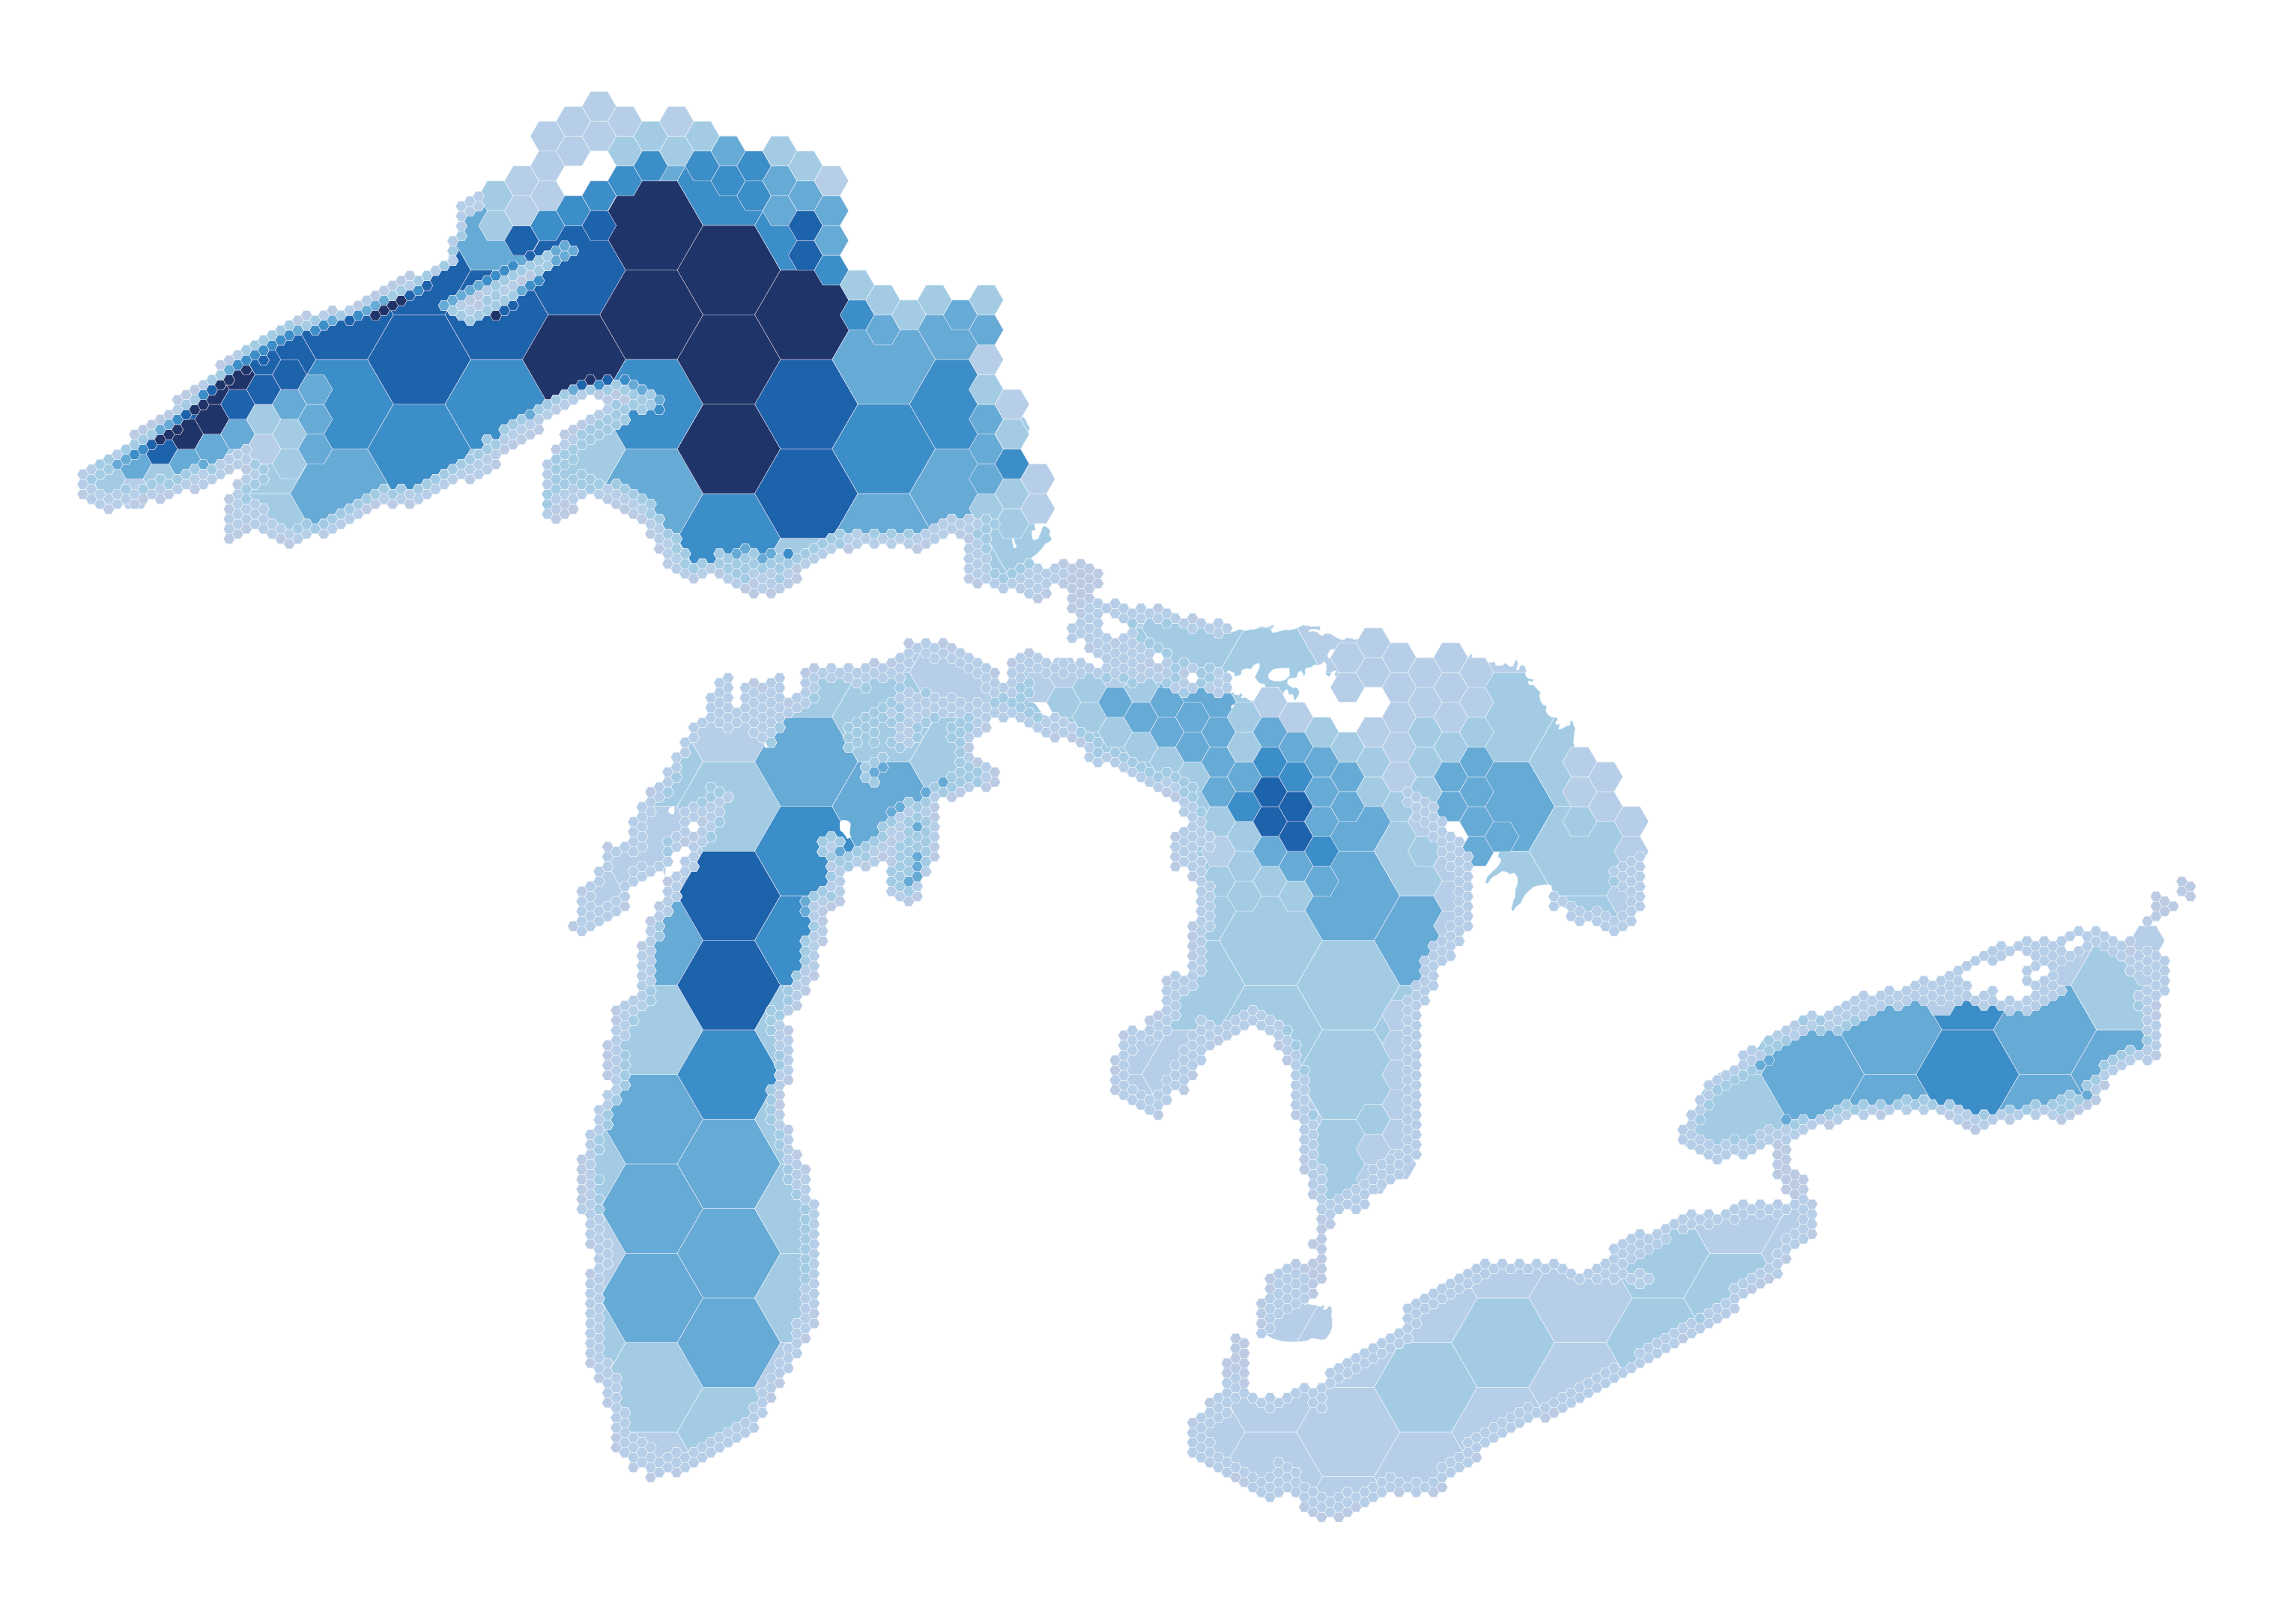 Map of the Great Lakes with differing colored Hexagons to show lake depth